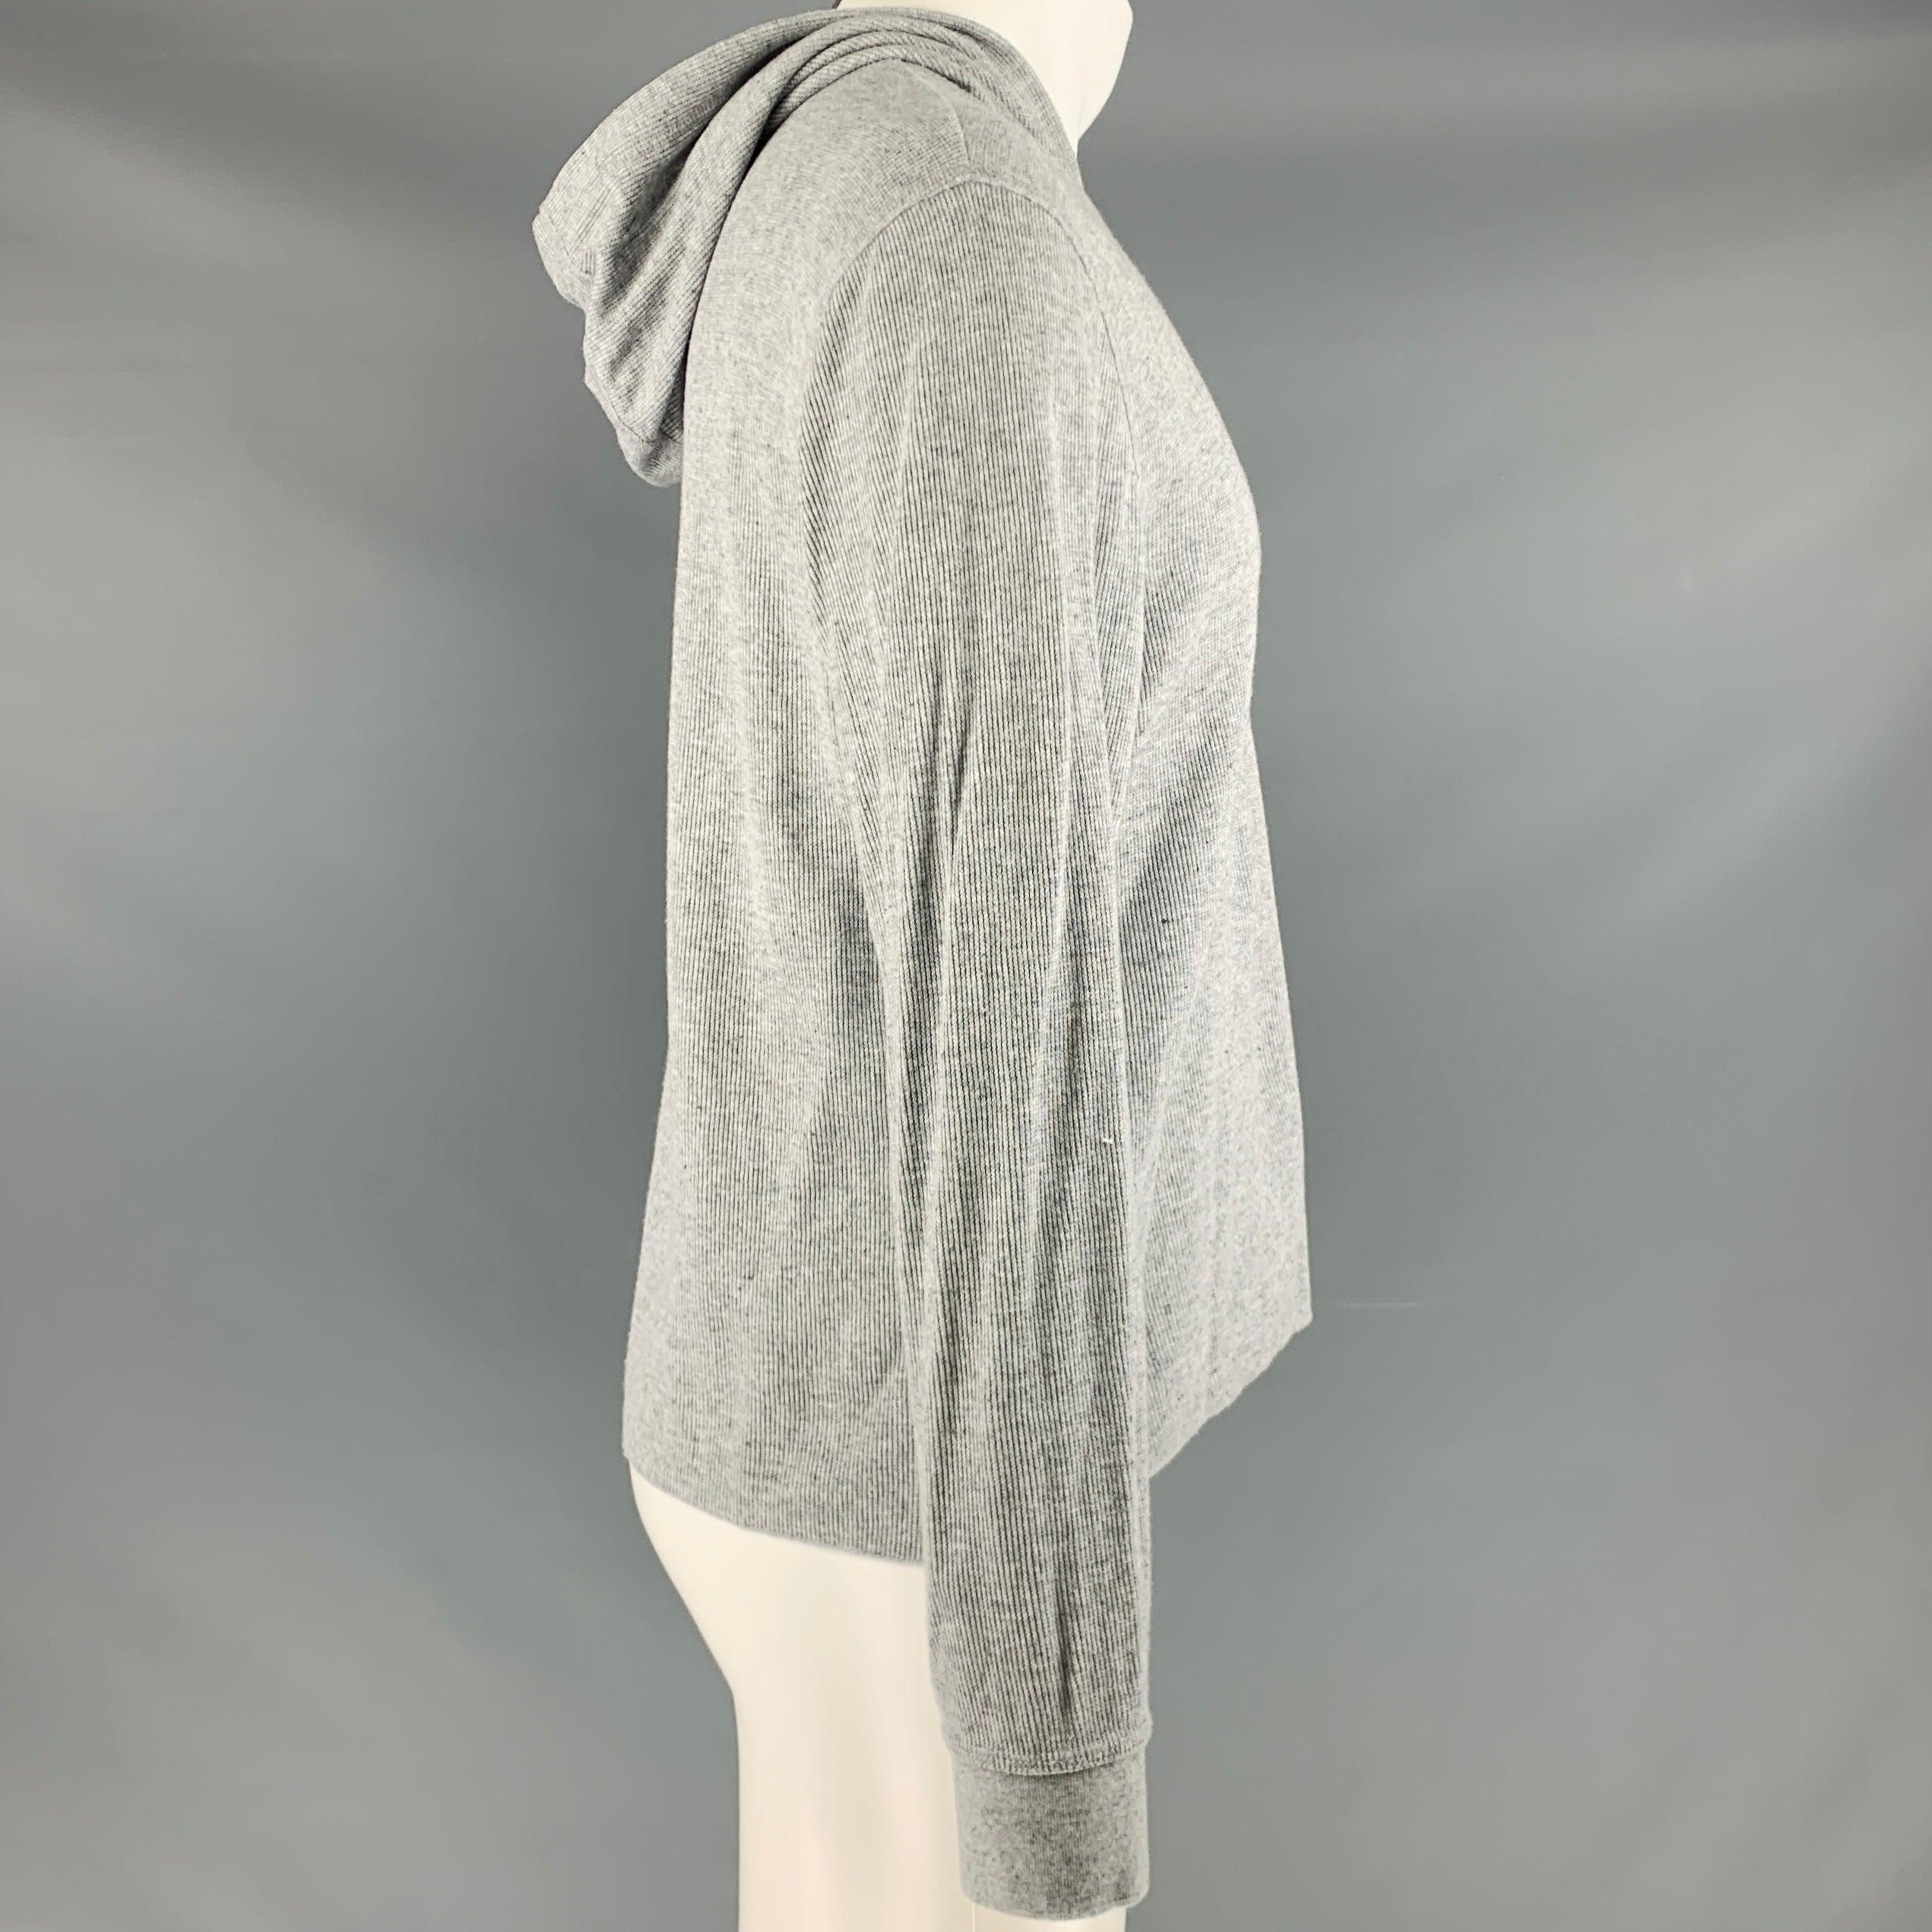 VINCE sweatshirt
in a grey coton blend fabric featuring a henley style with hood, textured knit, and half placket button closure.Excellent Pre-Owned Condition. 

Marked:   S 

Measurements: 
 
Shoulder: 19 inches Chest: 42 inches Sleeve: 24.5 inches